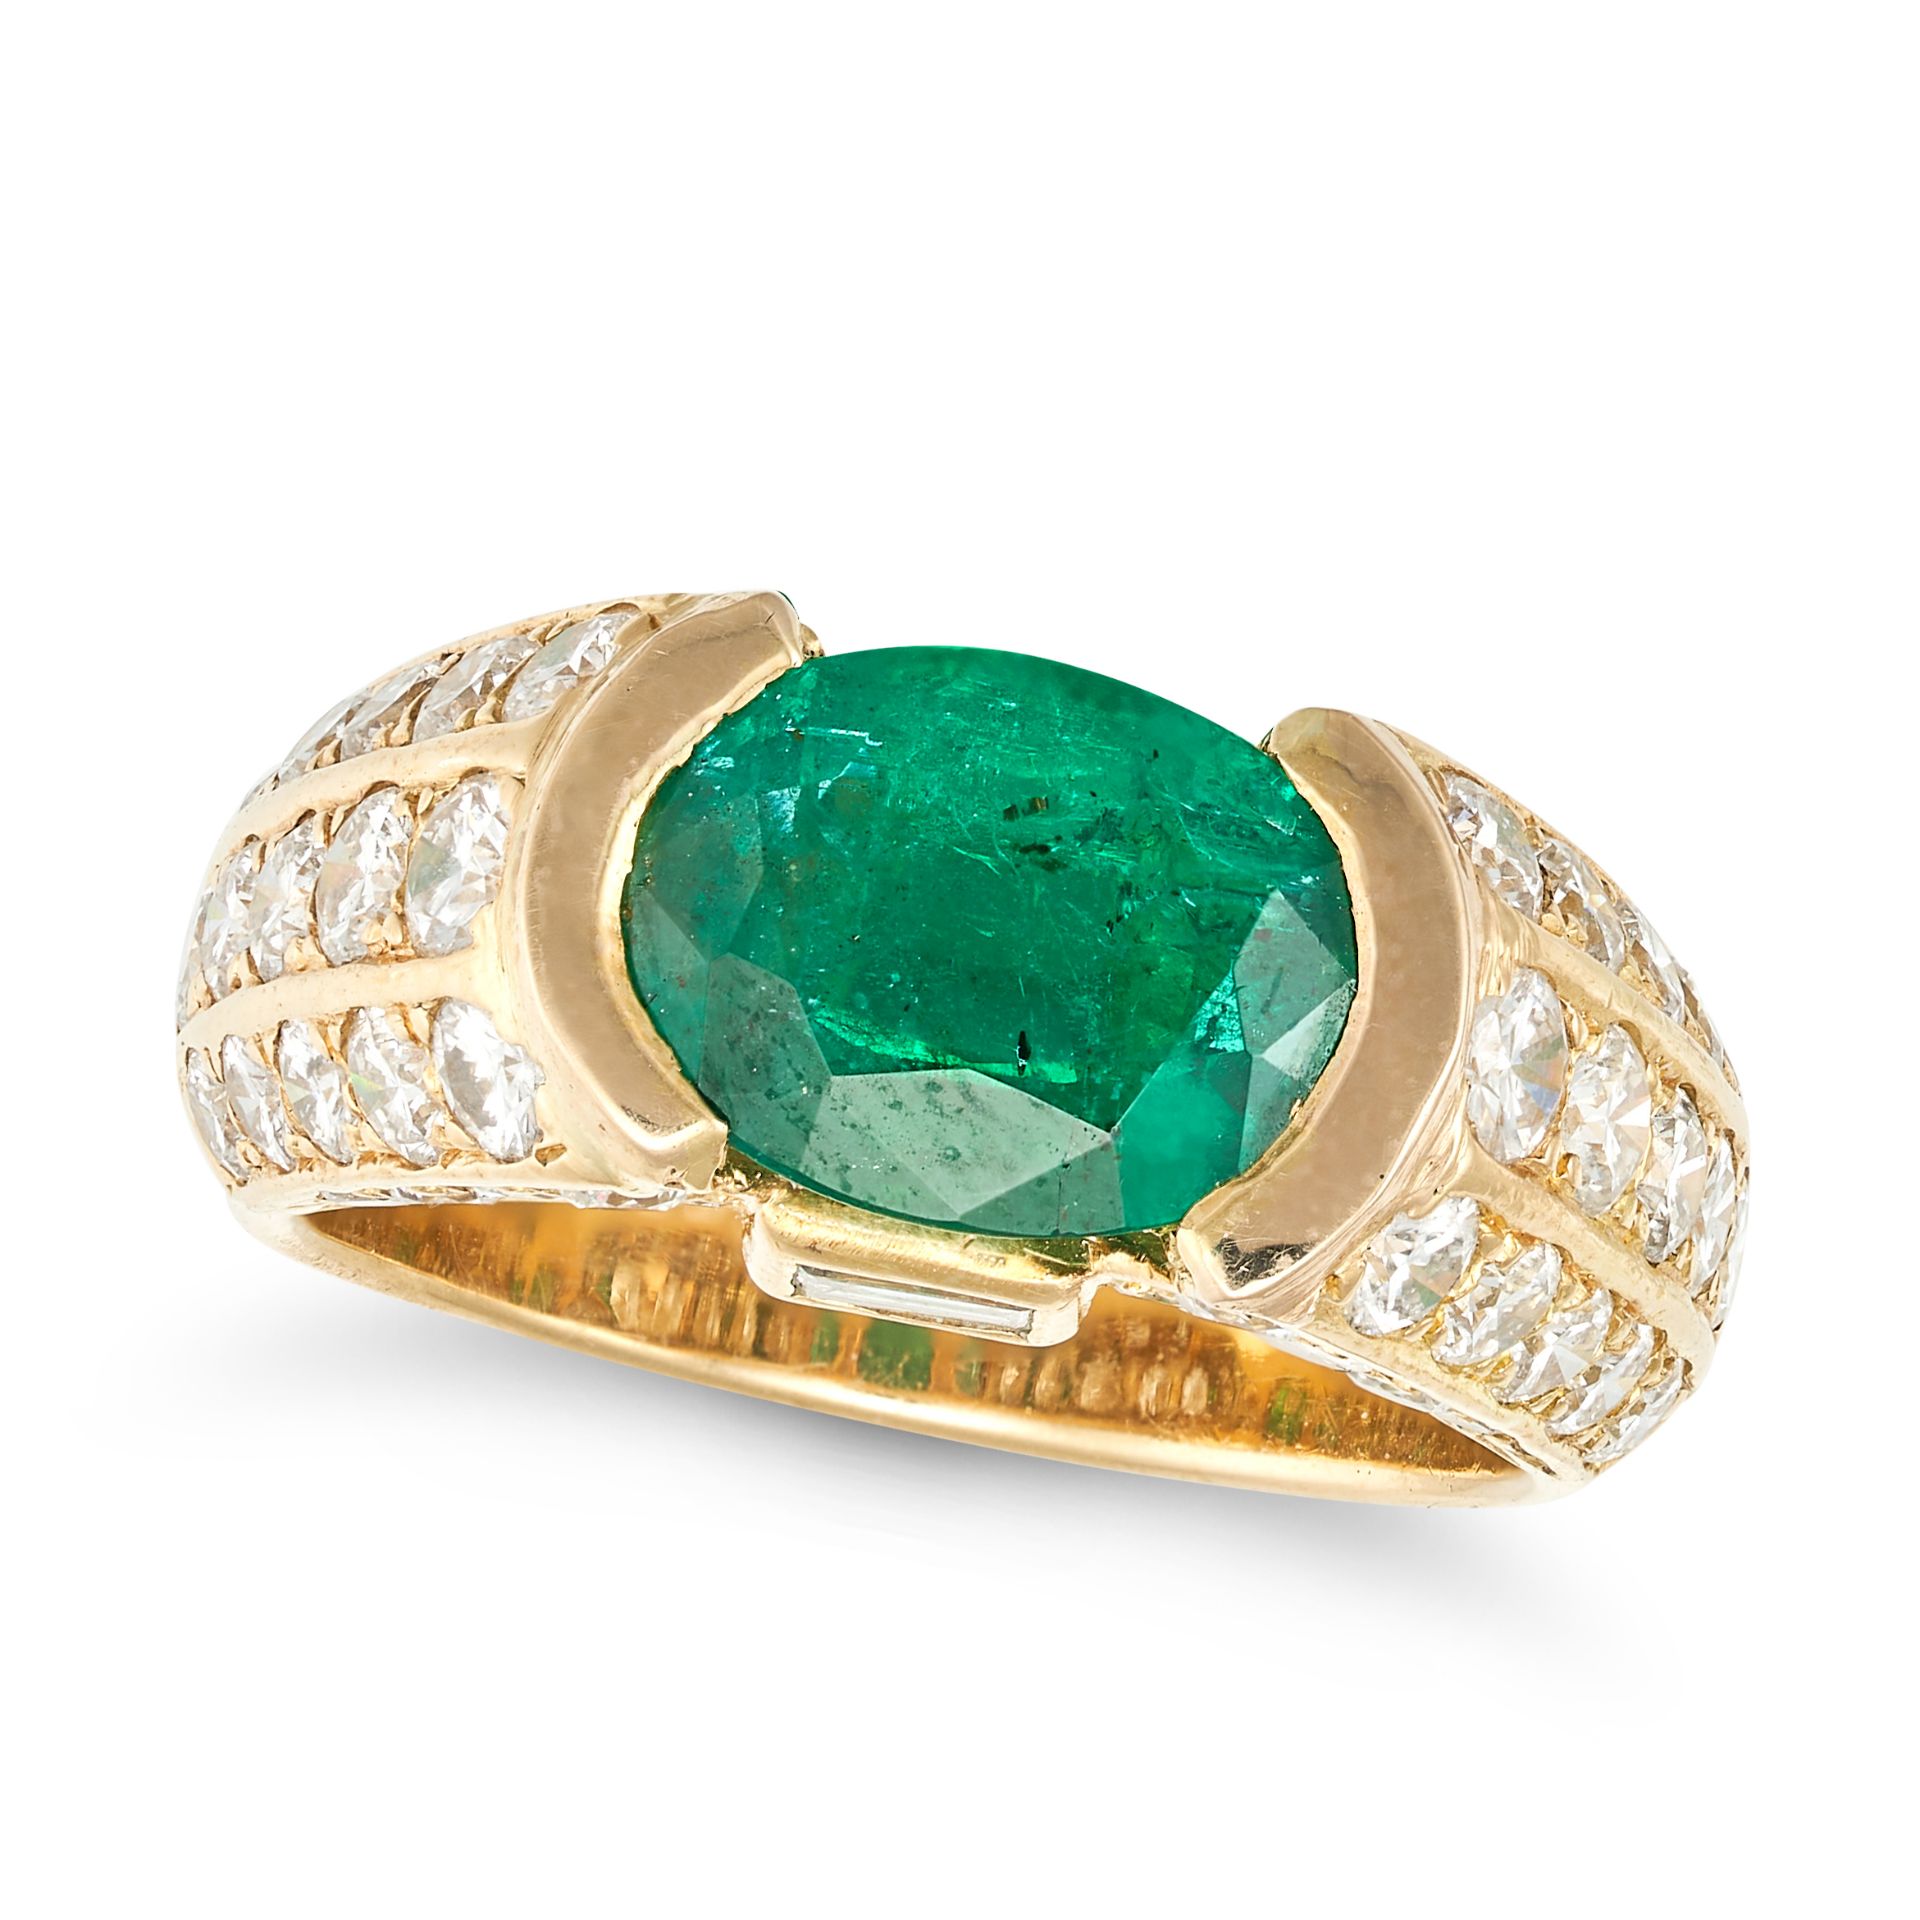 PERRIN, AN EMERALD AND DIAMOND RING in 18ct yellow gold, set with an oval cut emerald of approxim...